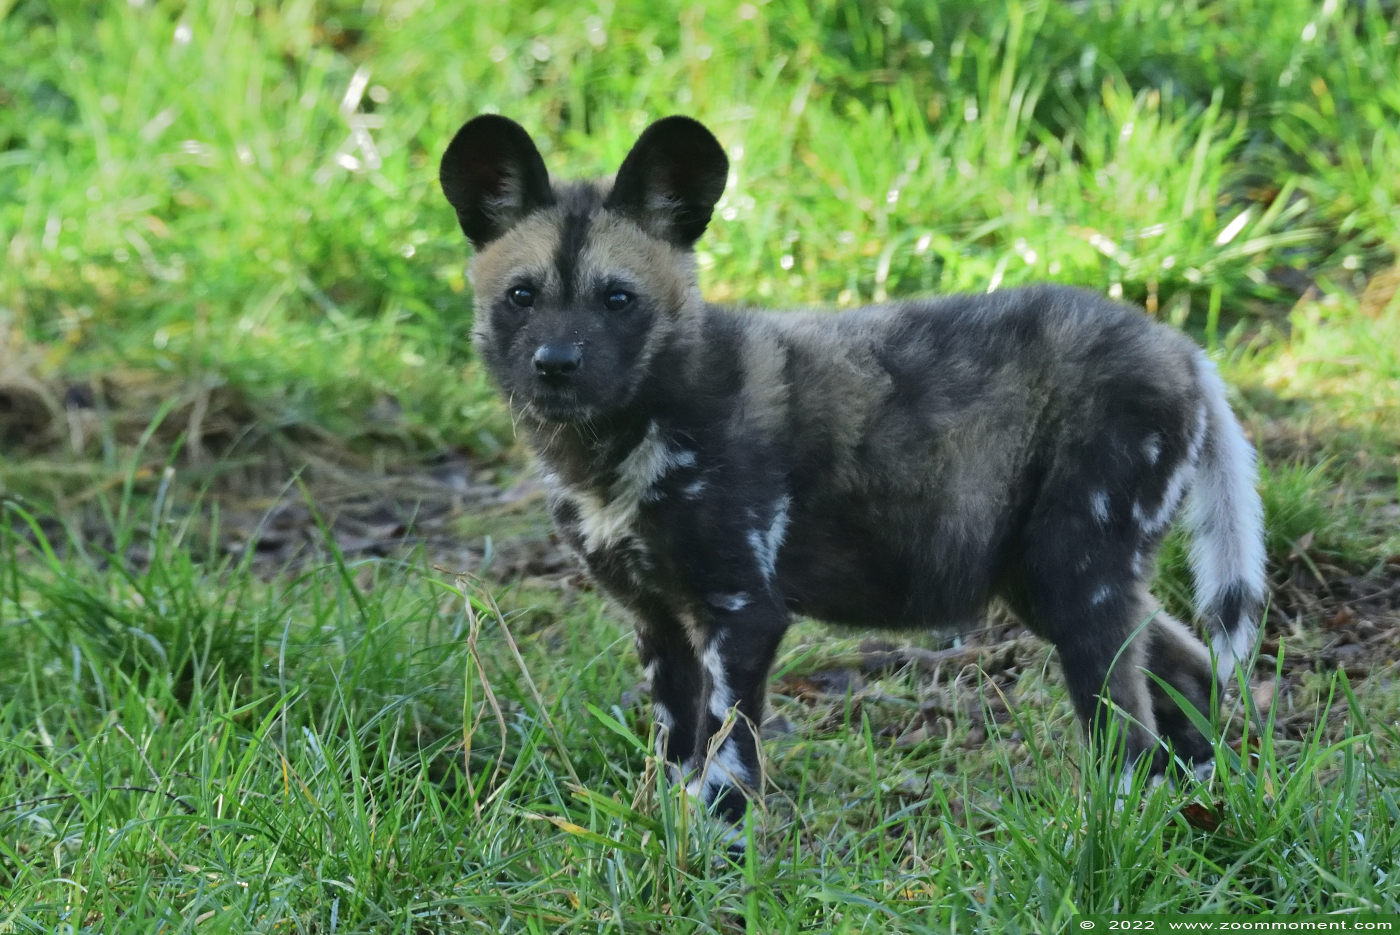 Afrikaanse wilde hond ( Lycaon pictus ) African wild dog
Pups, born 10 Januari 2022, on the picture about 3 weeks old

Palabras clave: Safaripark Beekse Bergen Afrikaanse wilde hond Lycaon pictus African wild dog pup